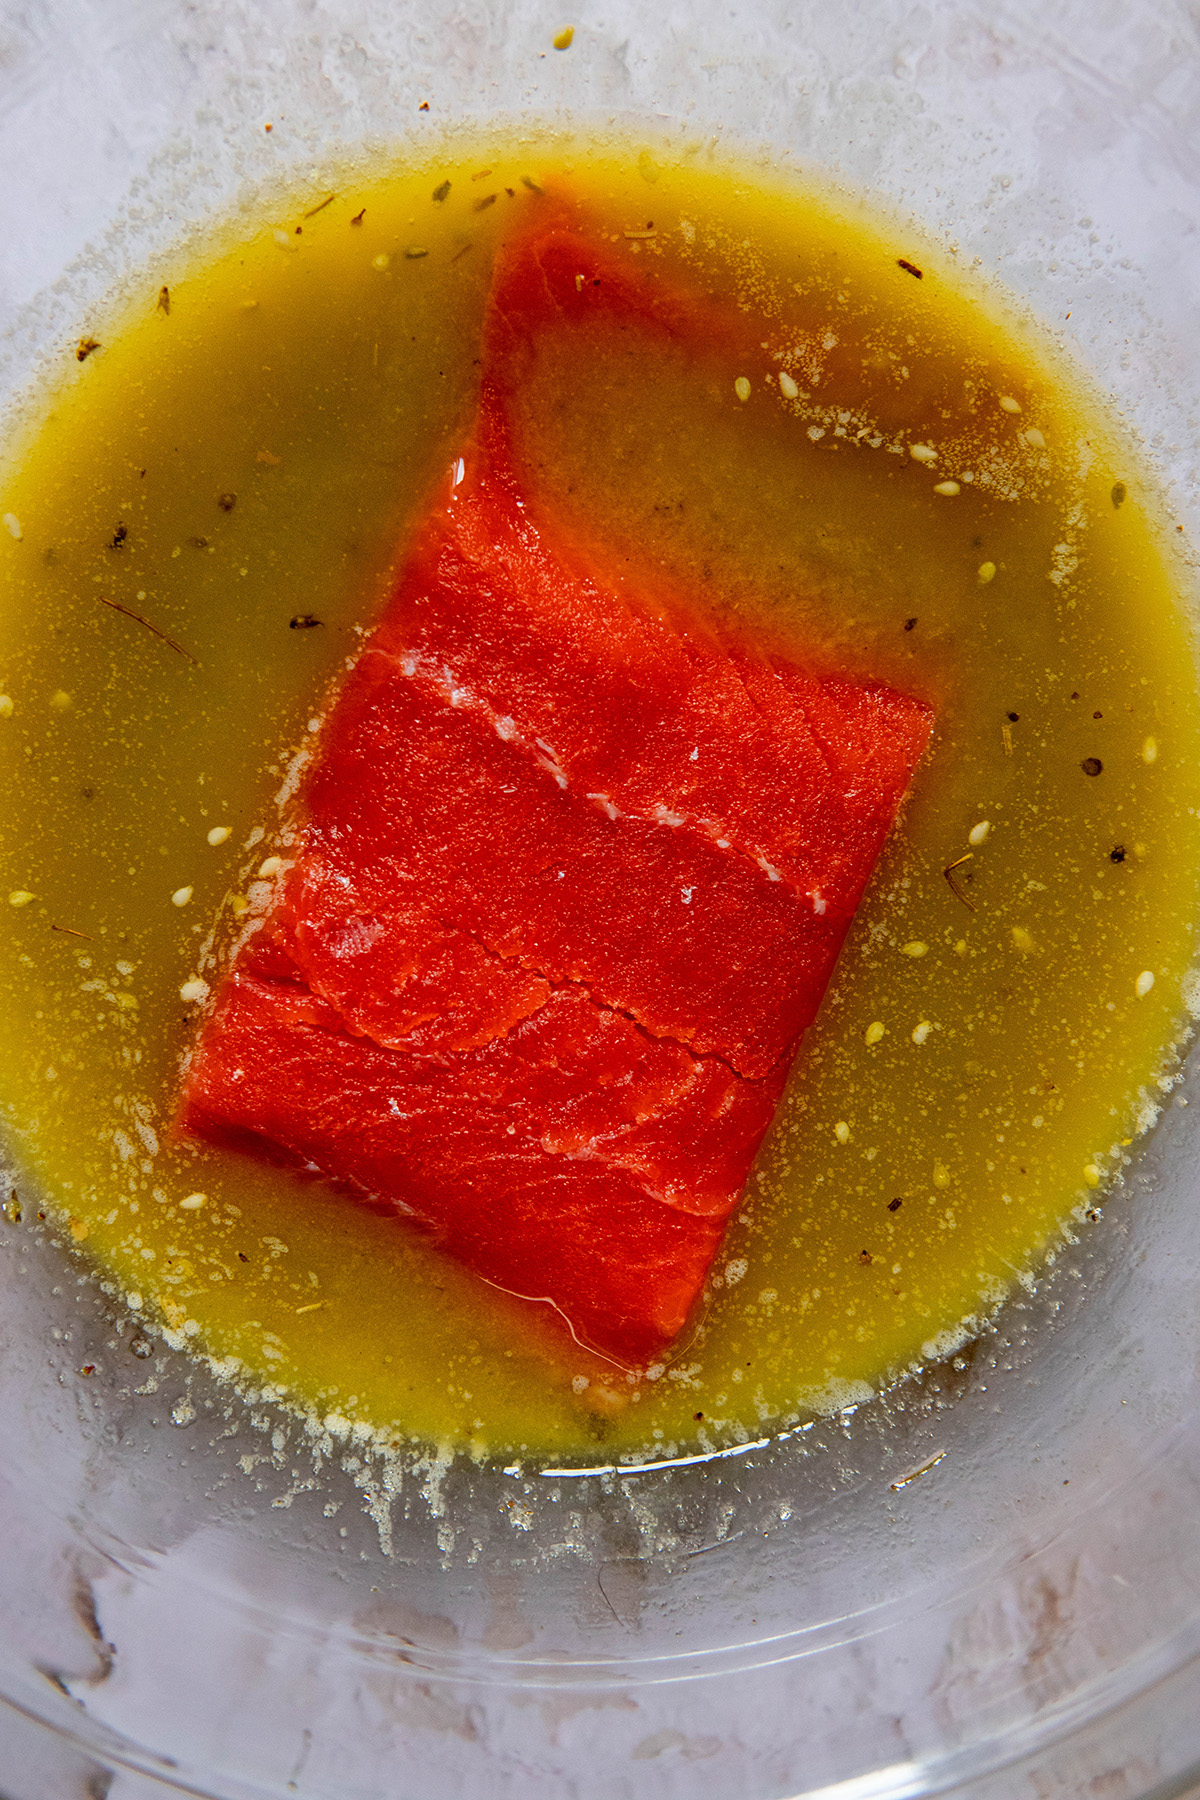 salmon fillet dipped in a sauce